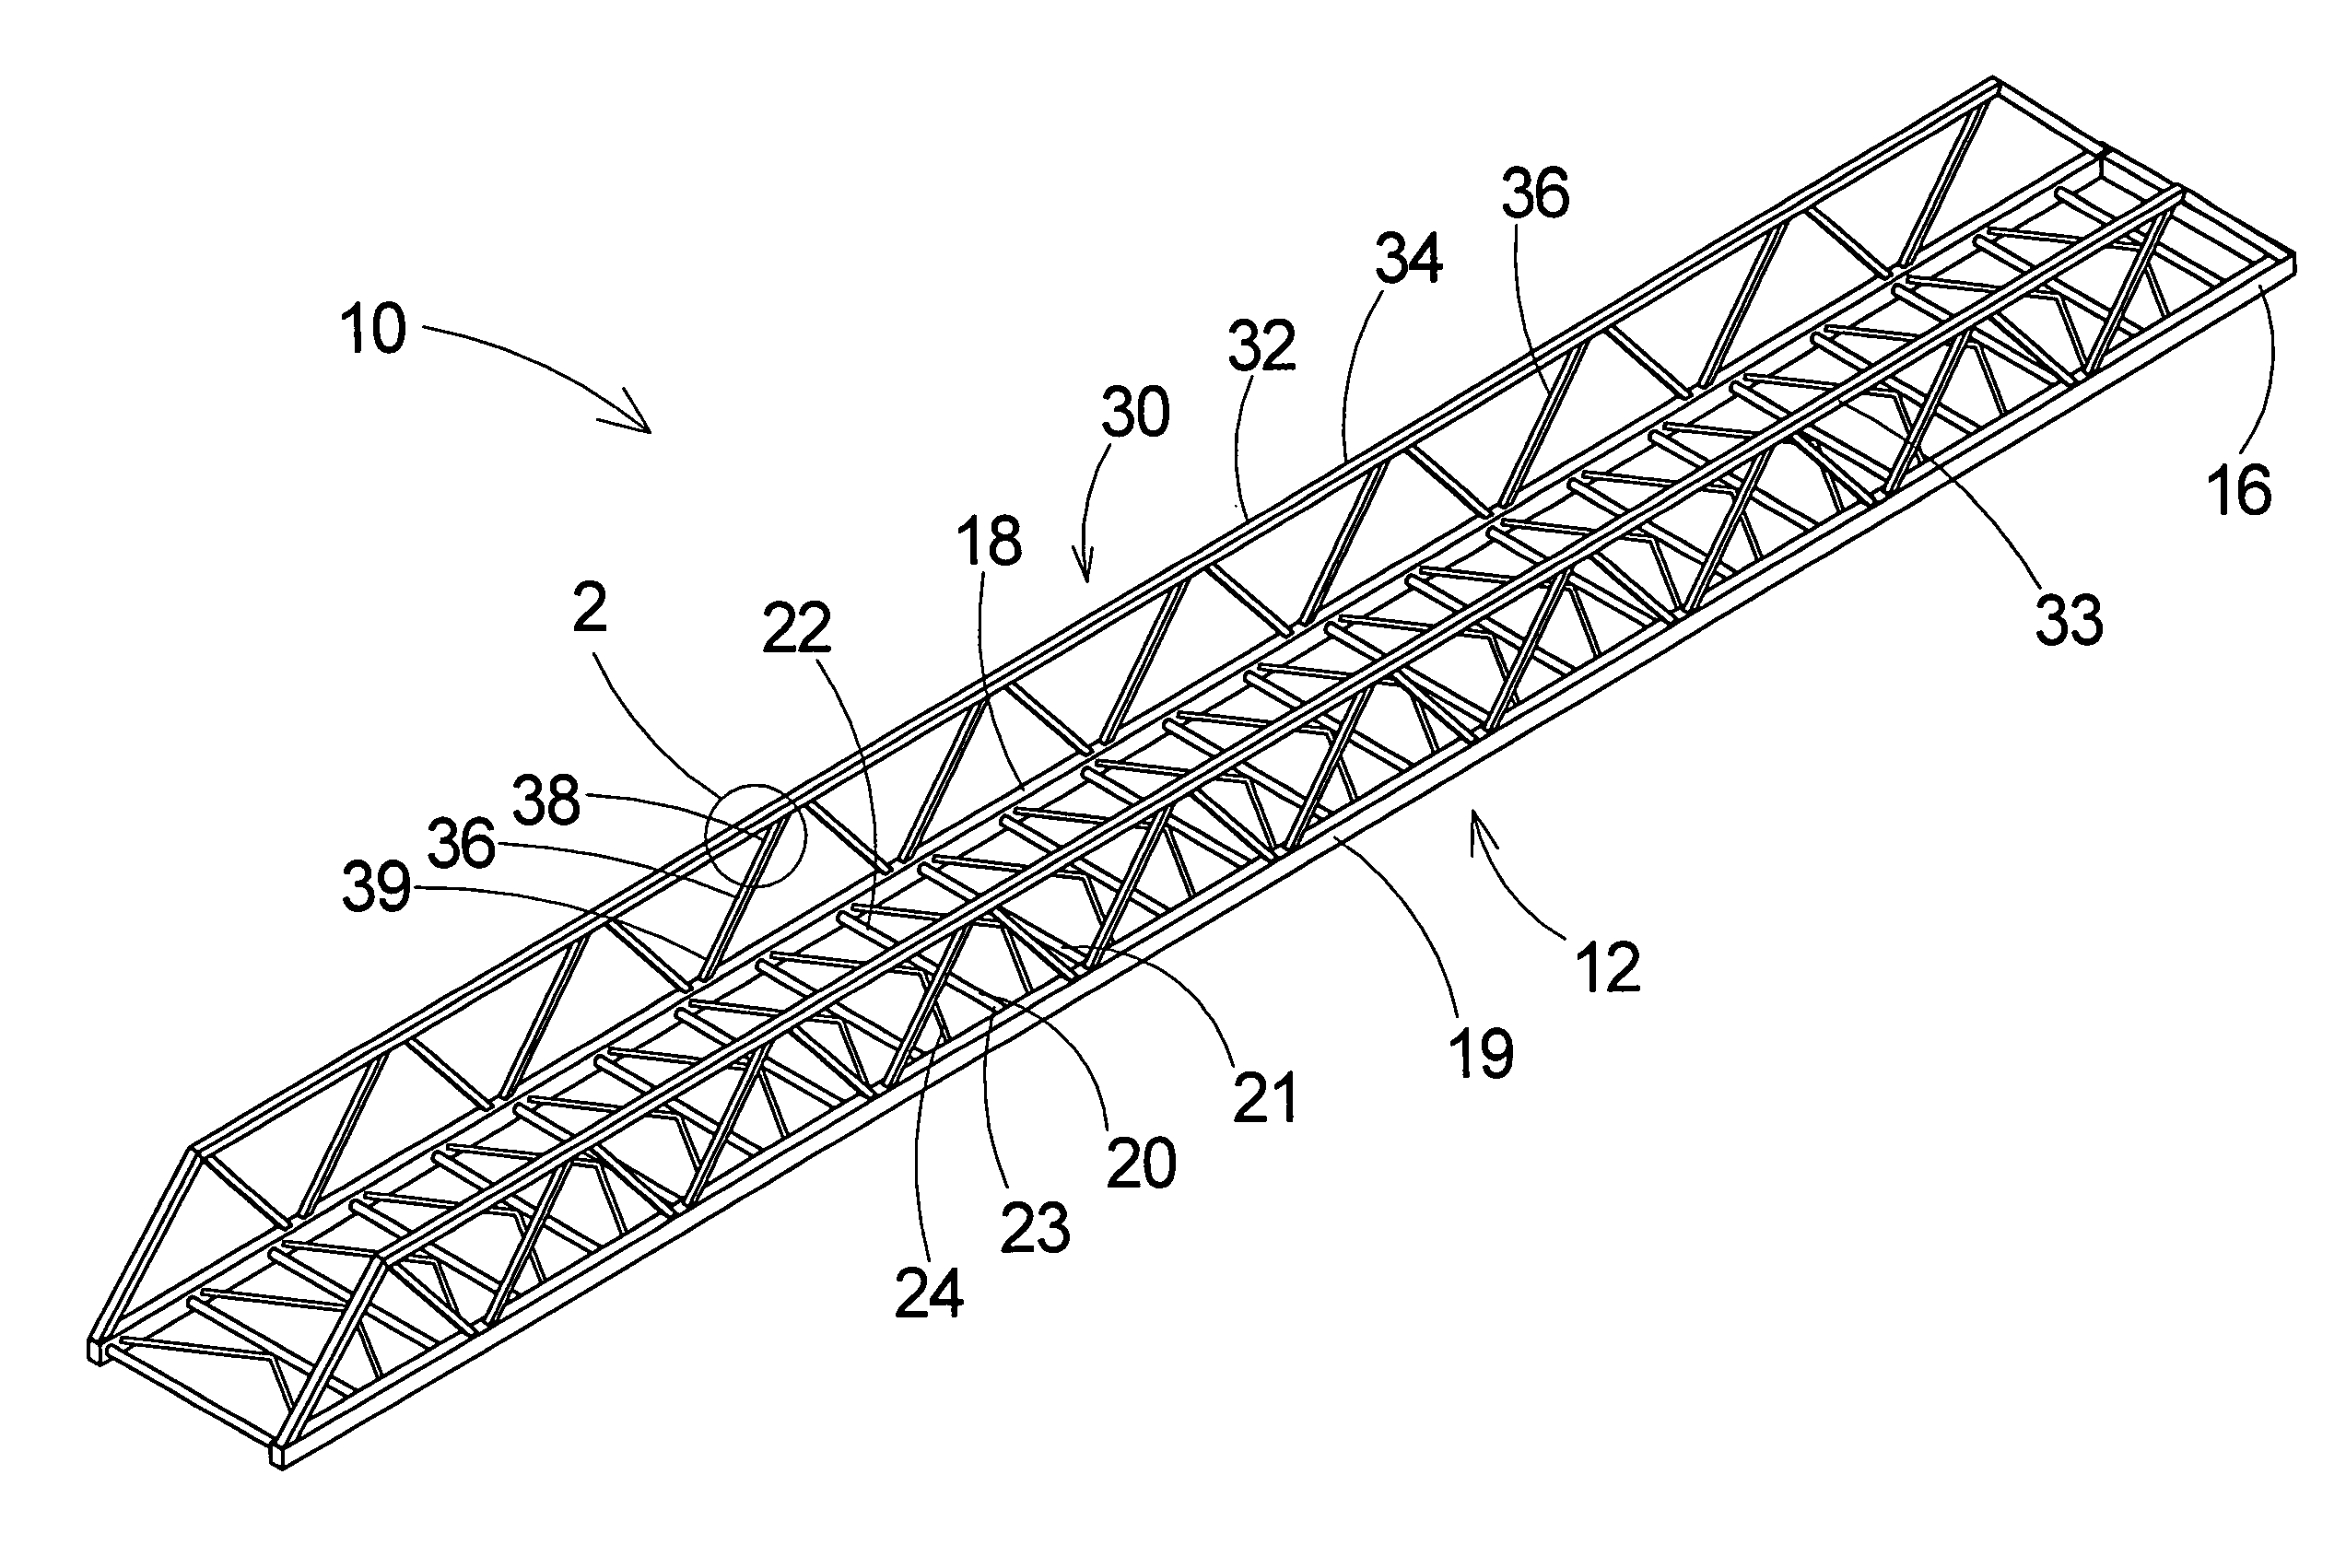 Apparatus and method of forming a corrosion resistant coating on a ladder